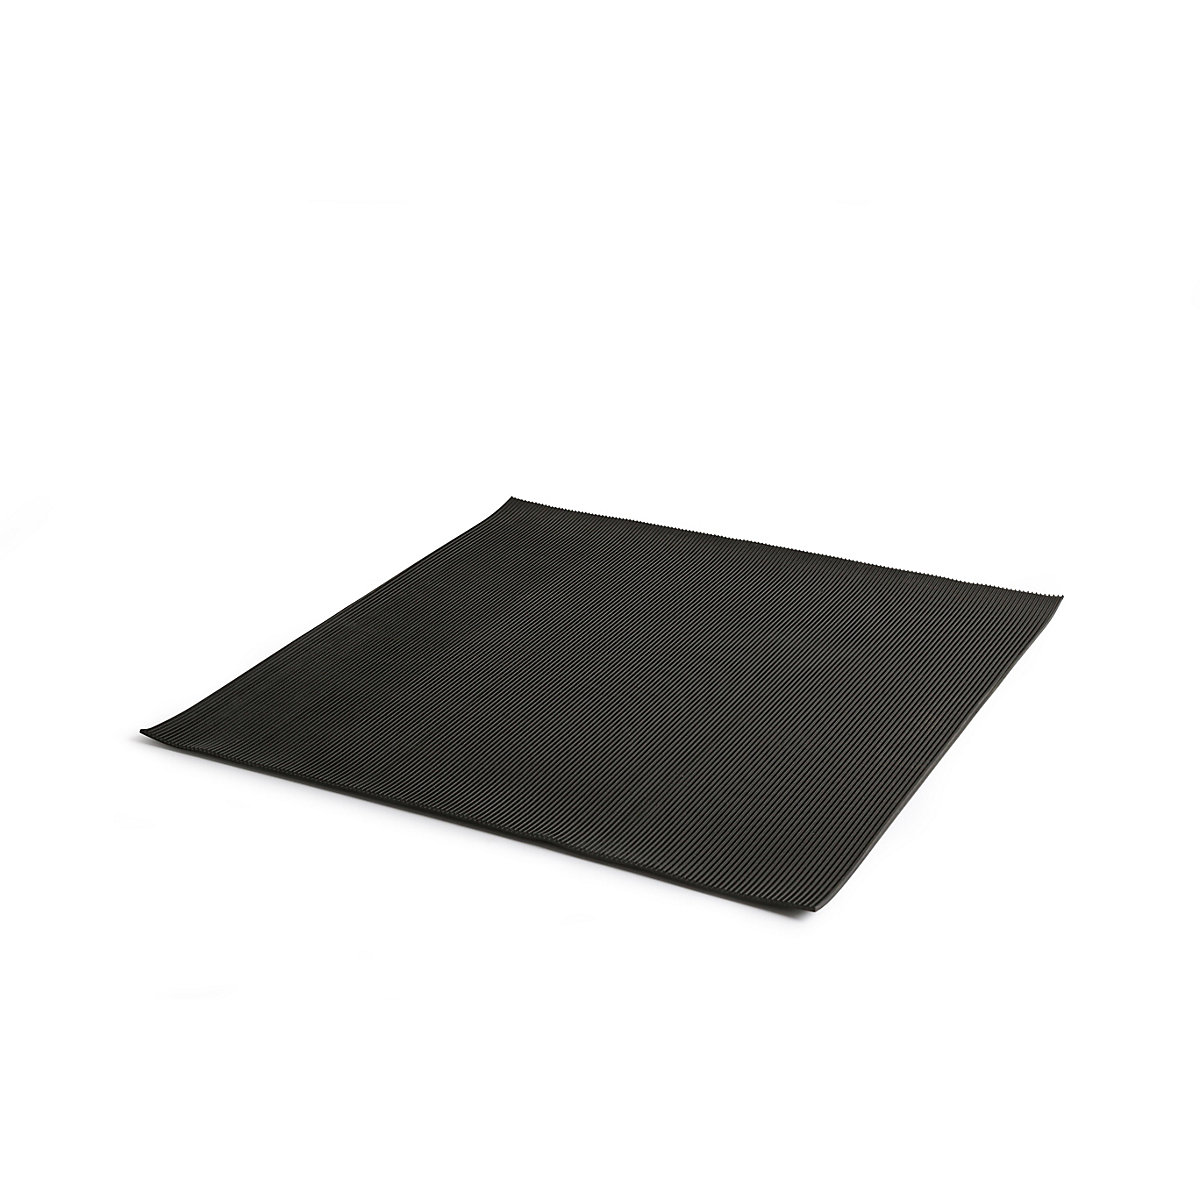 Ribbed rubber cover for tool cupboard - eurokraft pro